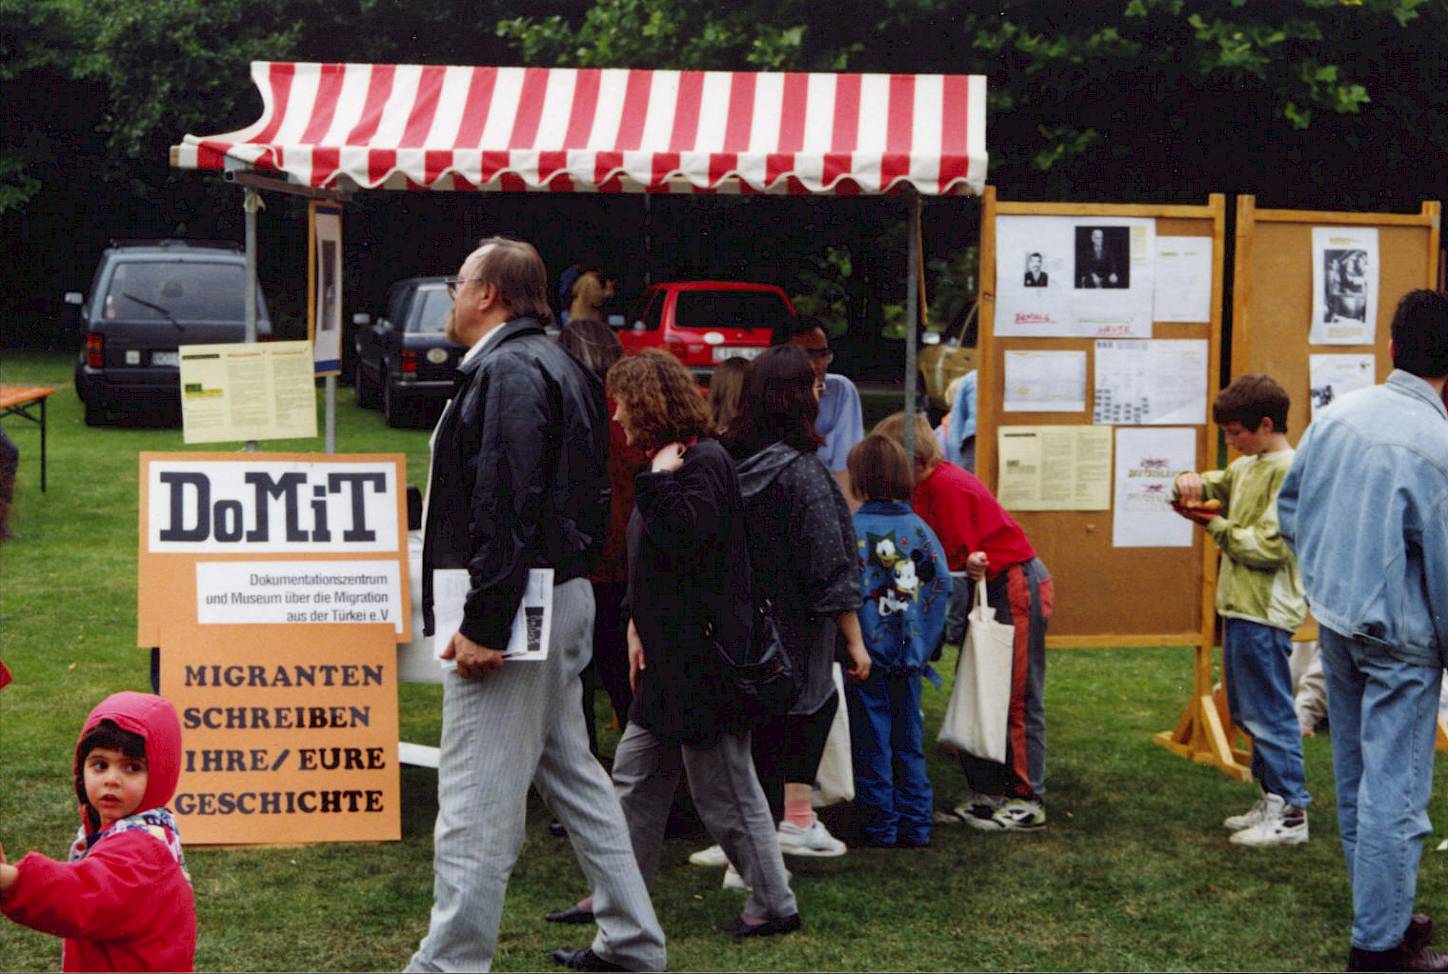 1990: From the outset, the founders of DOMiD (DOMiT in early years) call for the preservation of migrant cultural heritage in Germany in the form of a migration museum.  This desire for museum representation remains unheard for a long time, followed by conferences, exhibitions and publications.